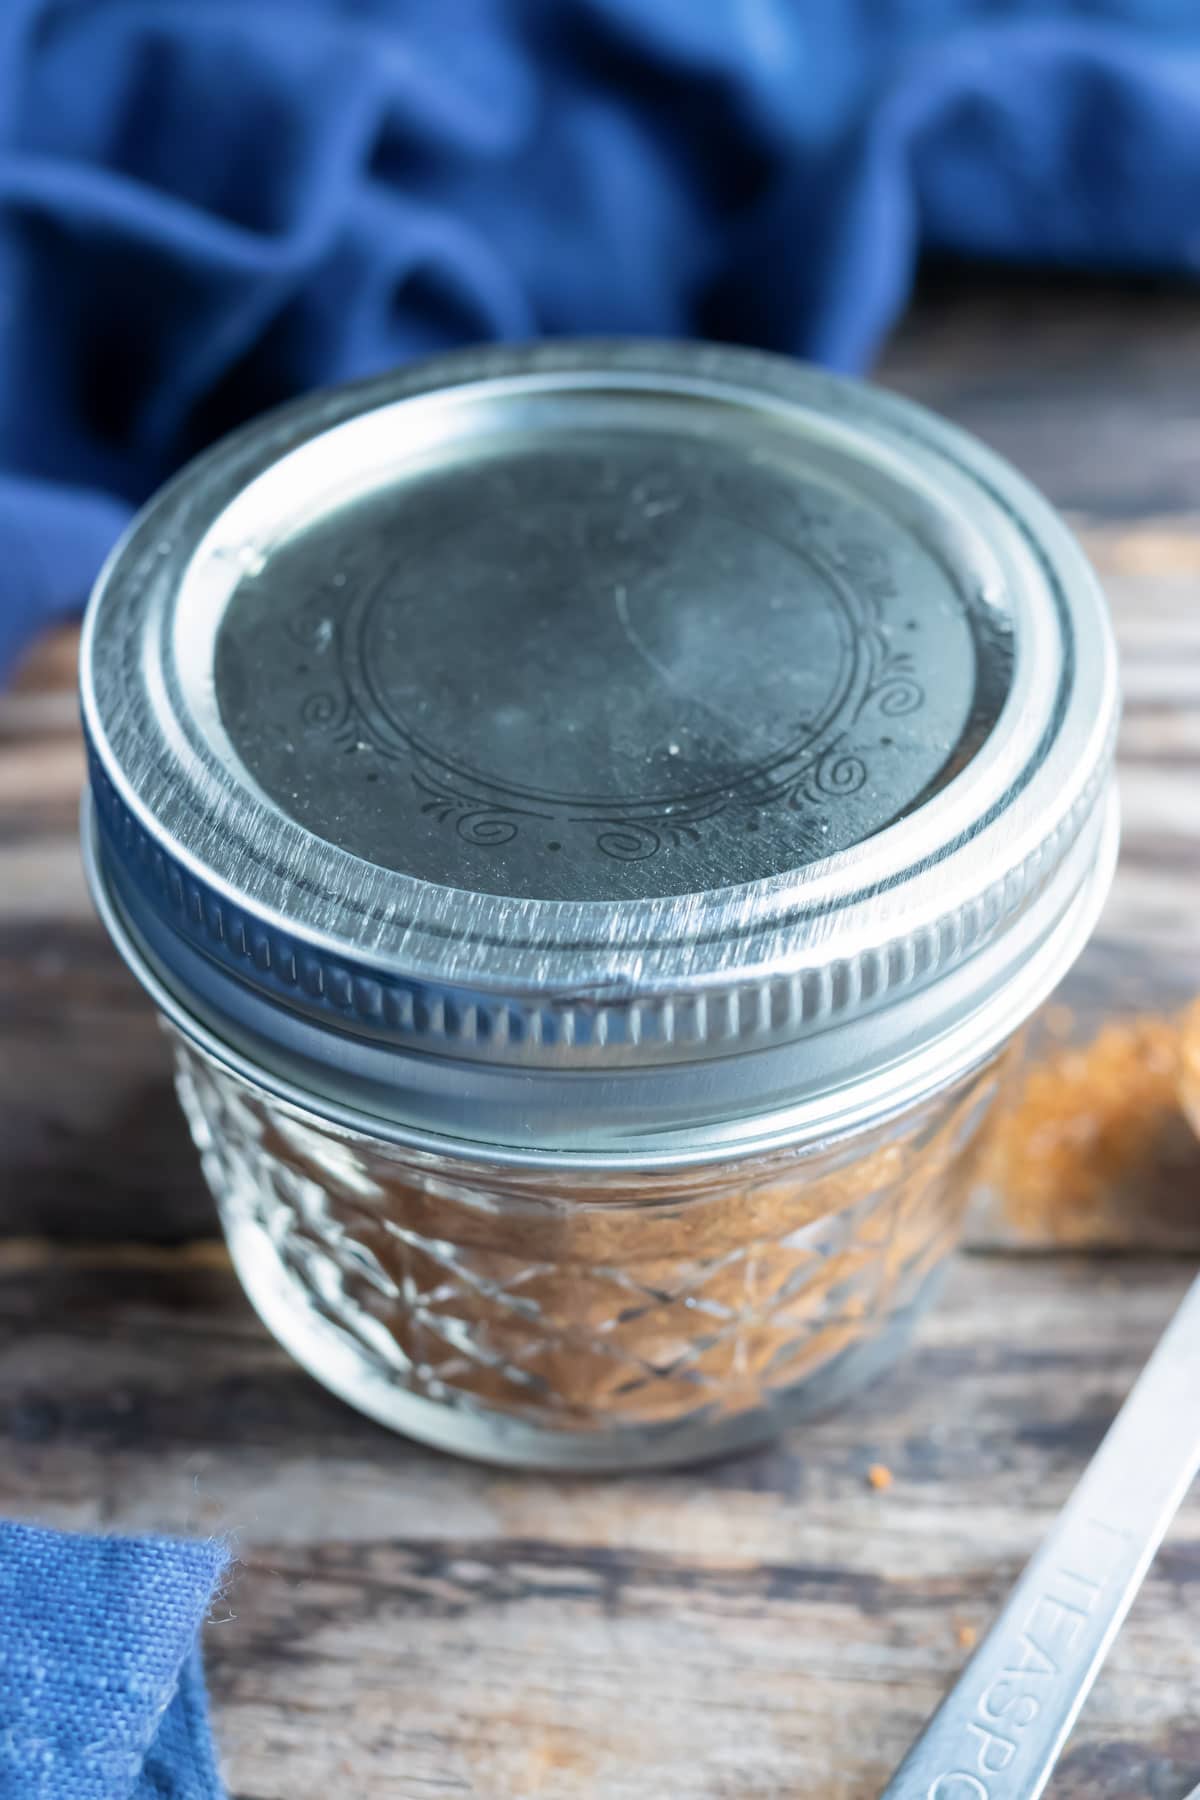 How to store taco seasoning mix in a glass jar with a lid.